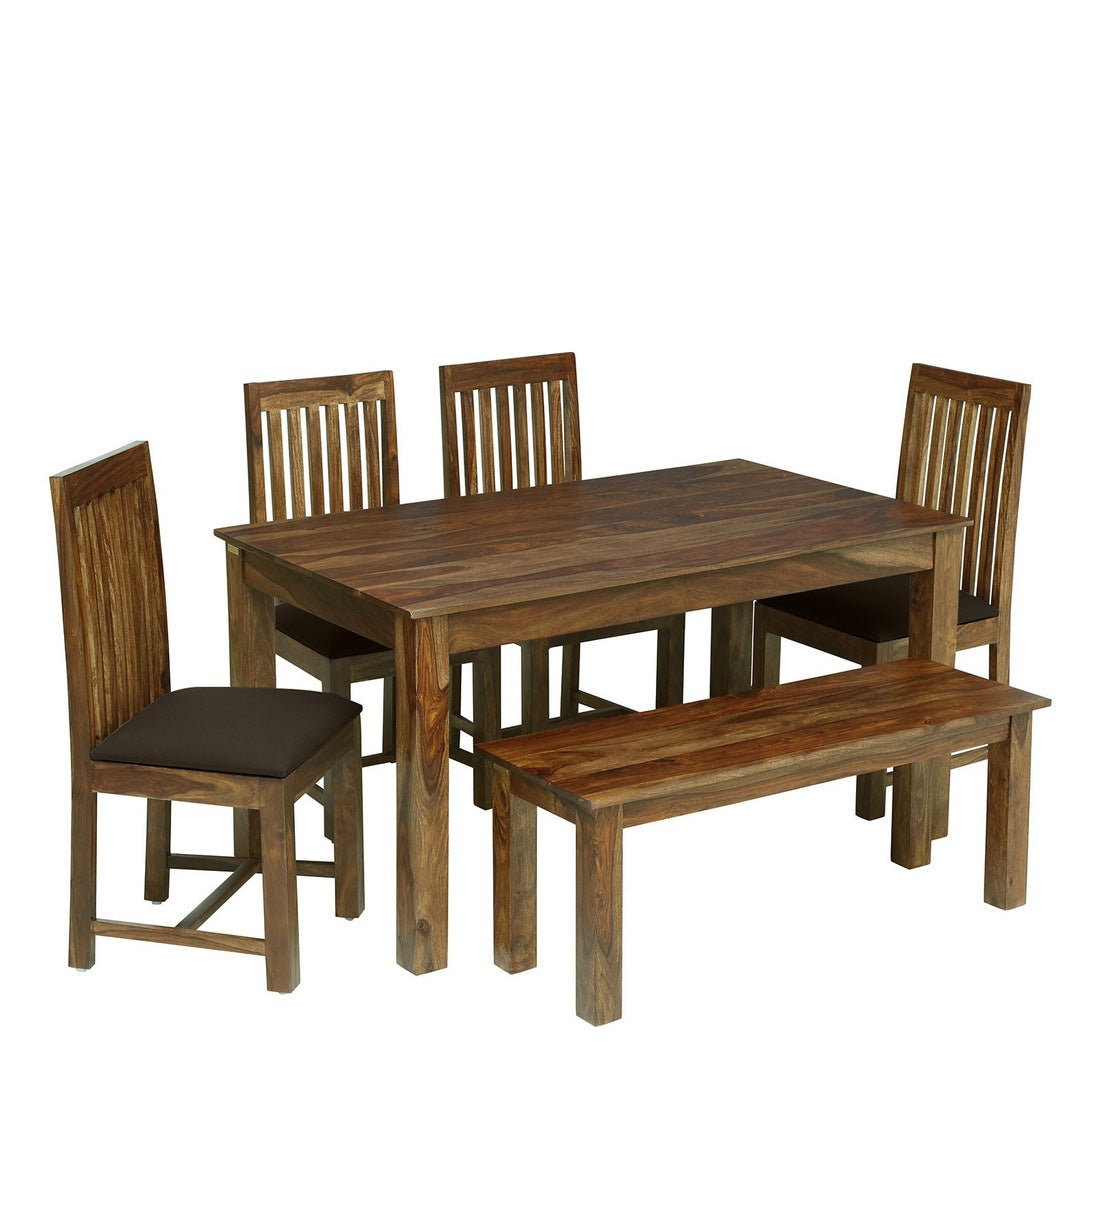 Peter Wooden 6 Seater Dining Set With Bench For Dining Room in Provincial Teak Finish - Rajwada Furnish